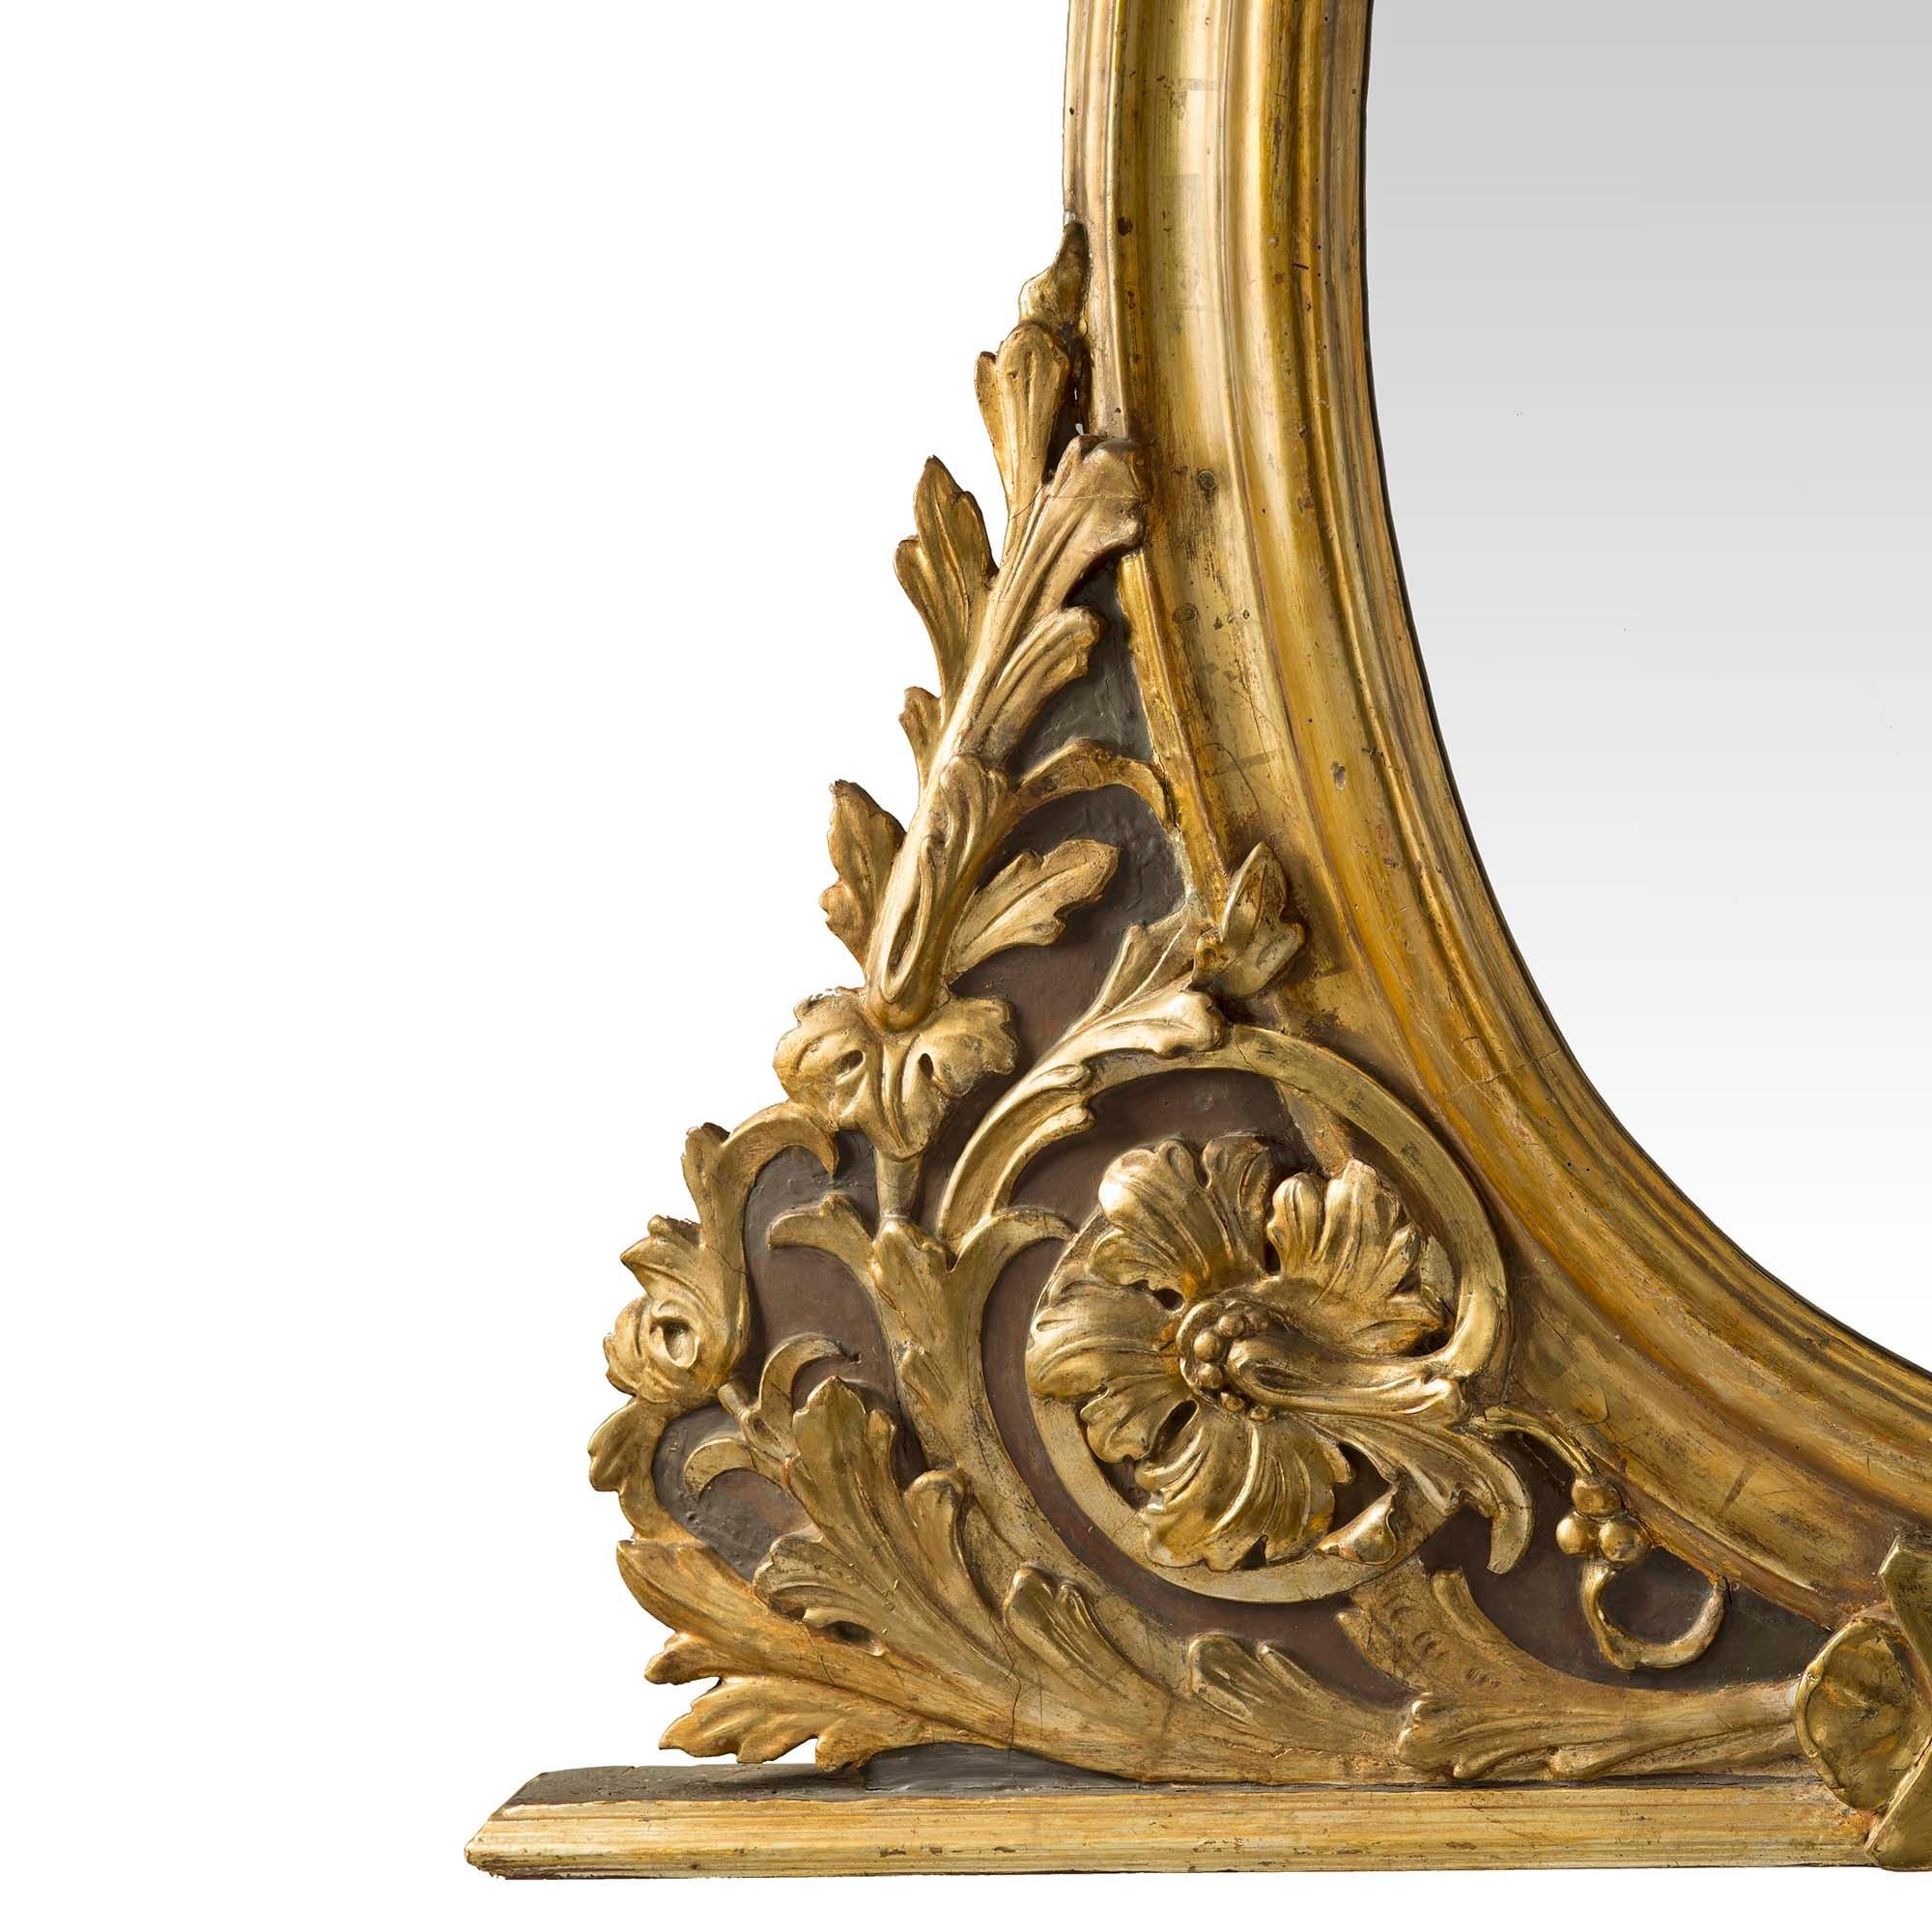 An unusually shaped pair of Italian 18th century mecca and patinated mirrors. The pair with a wide mottled bottom shelf has a central shield flanked by elaborate foliate mecca scrolls. At the center are vertical oval mottled frames fitted with